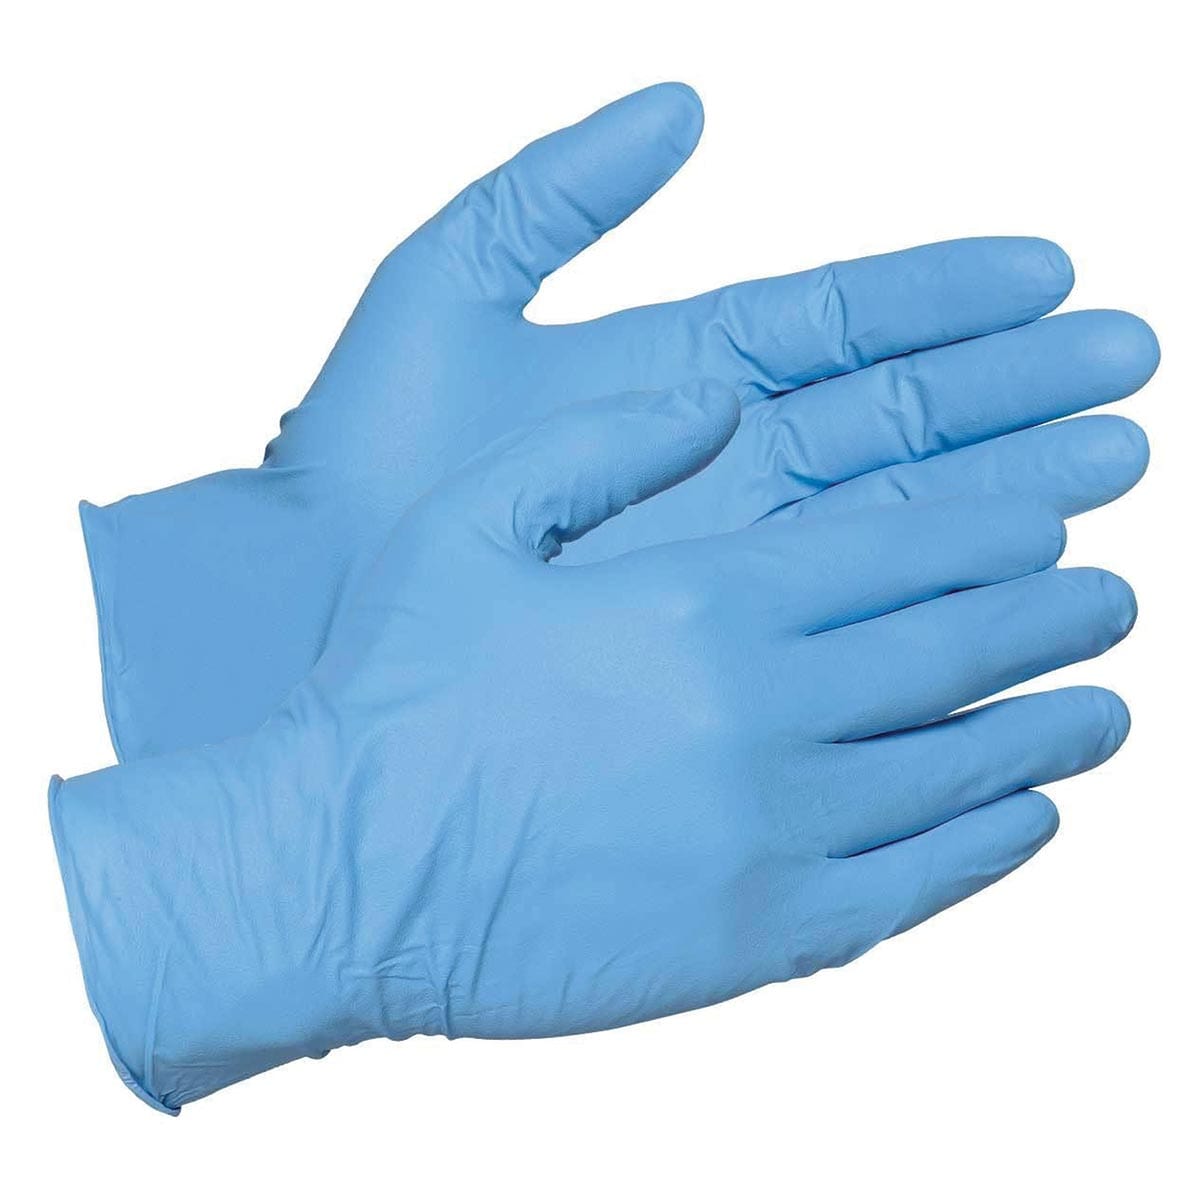 Gemplers 4-mil Disposable Nitrile Gloves, Box of 100